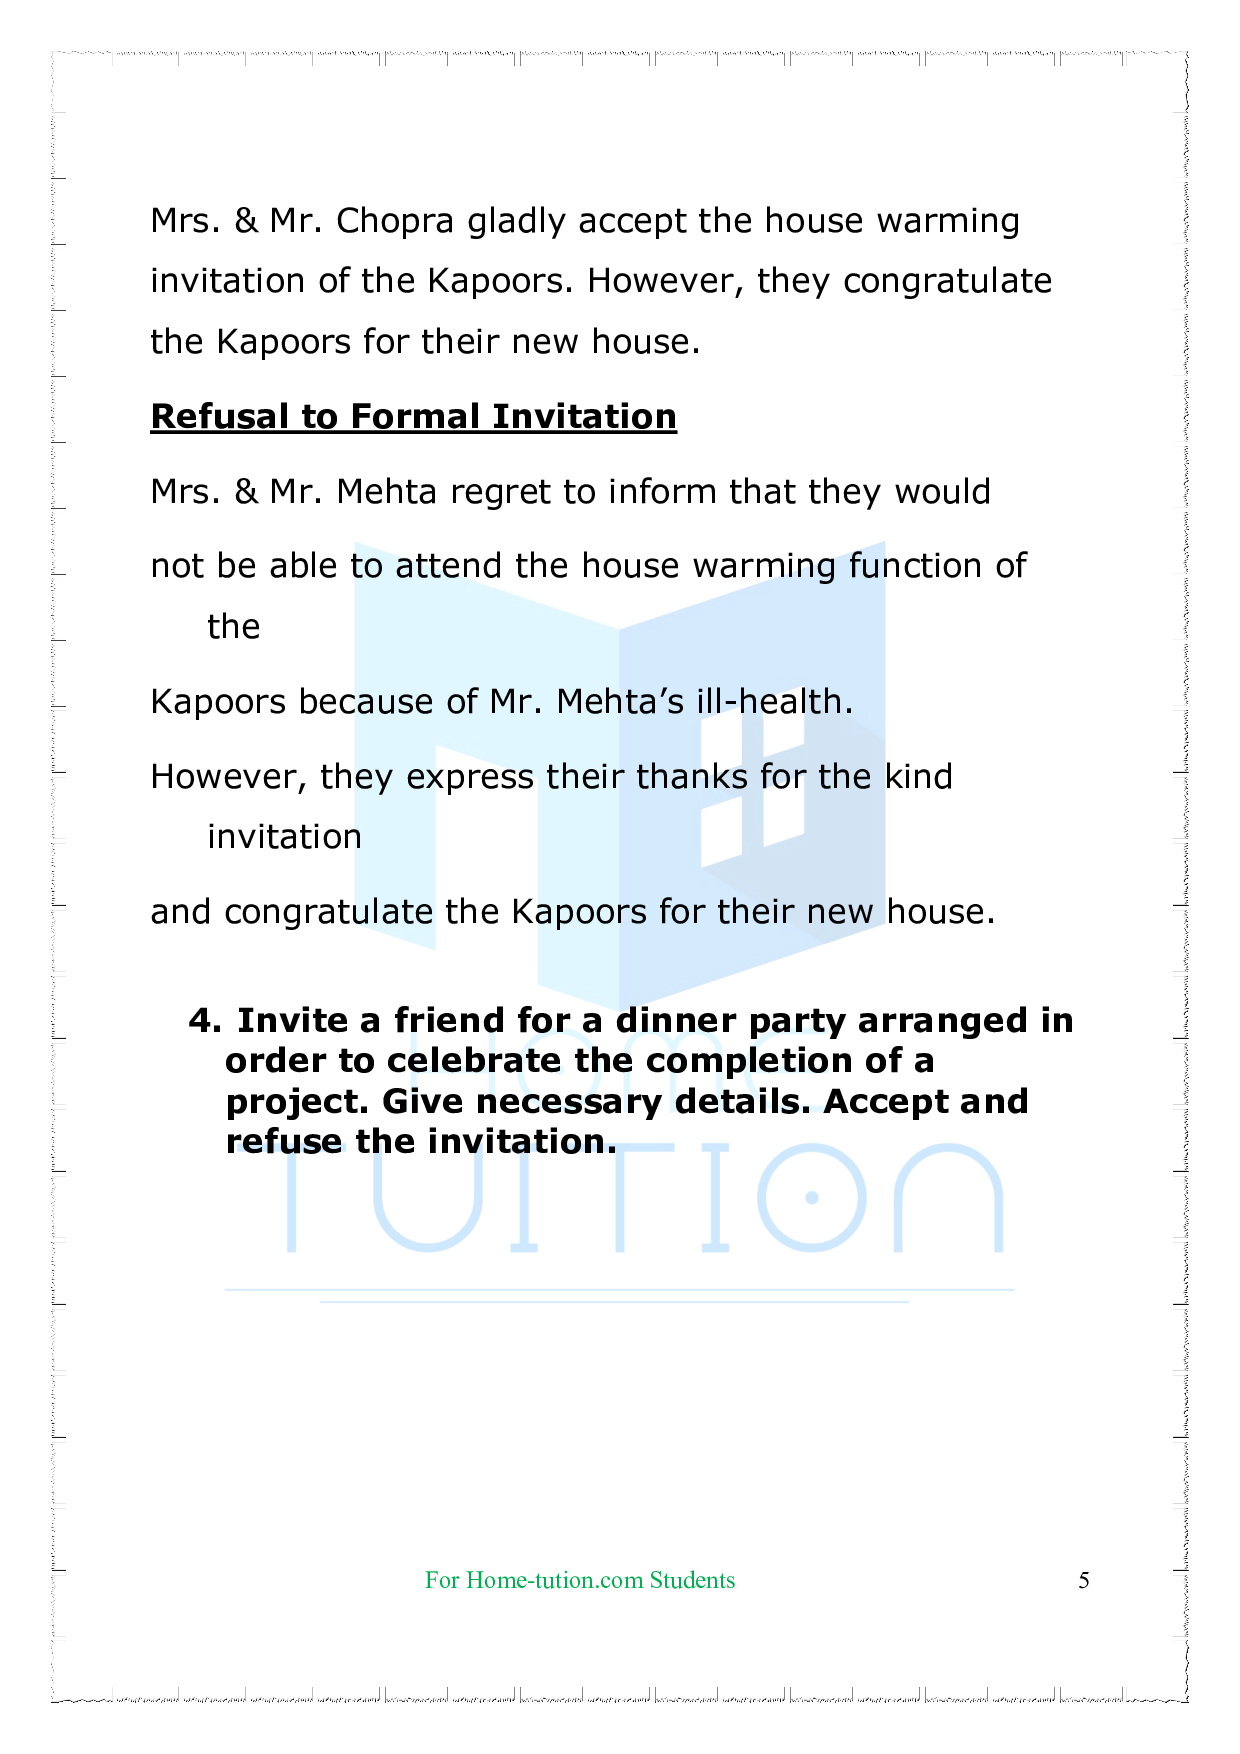 Chapter-Formal invitation & Reply Questions